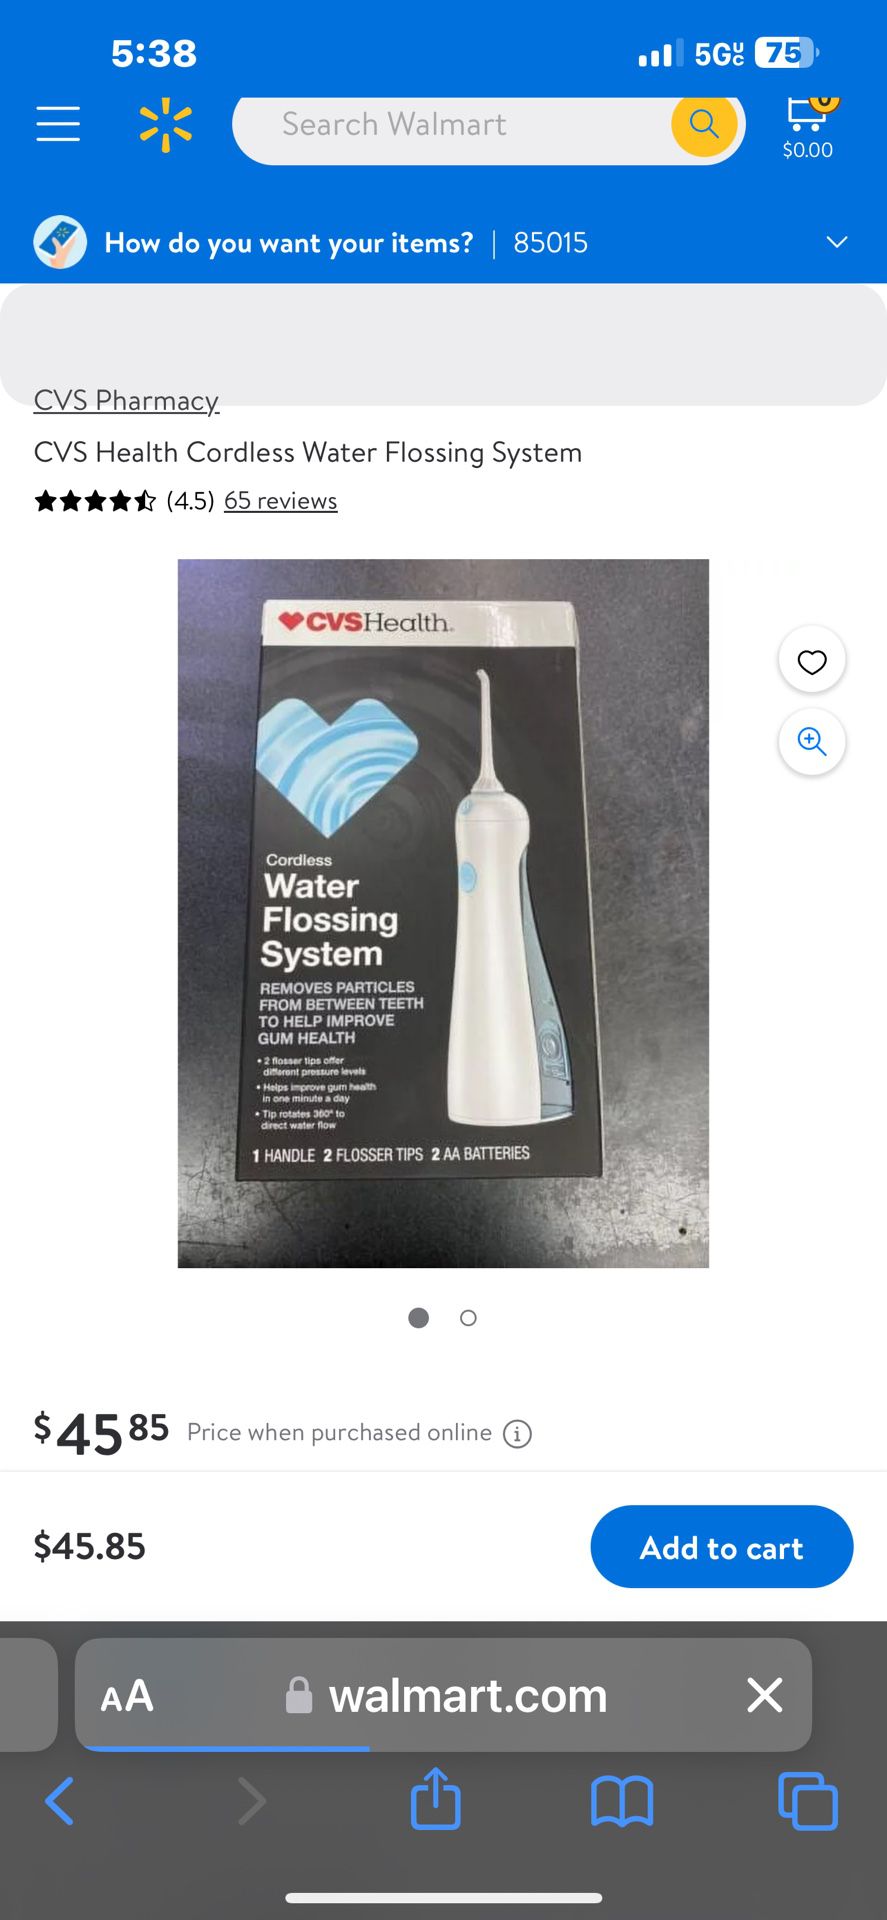 cvs health cordless water flossing system new